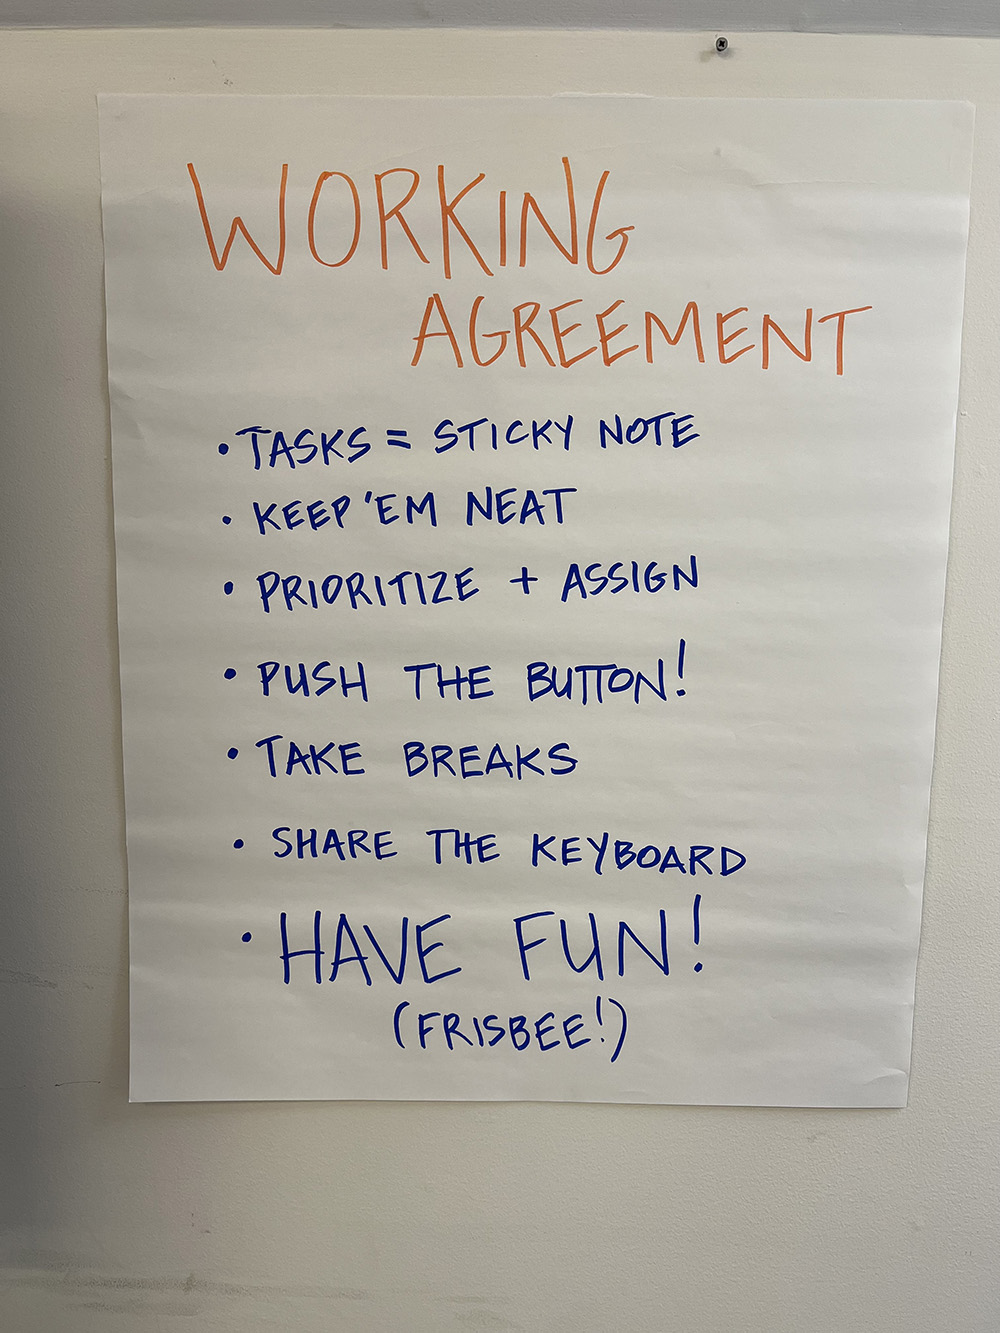 Working agreement